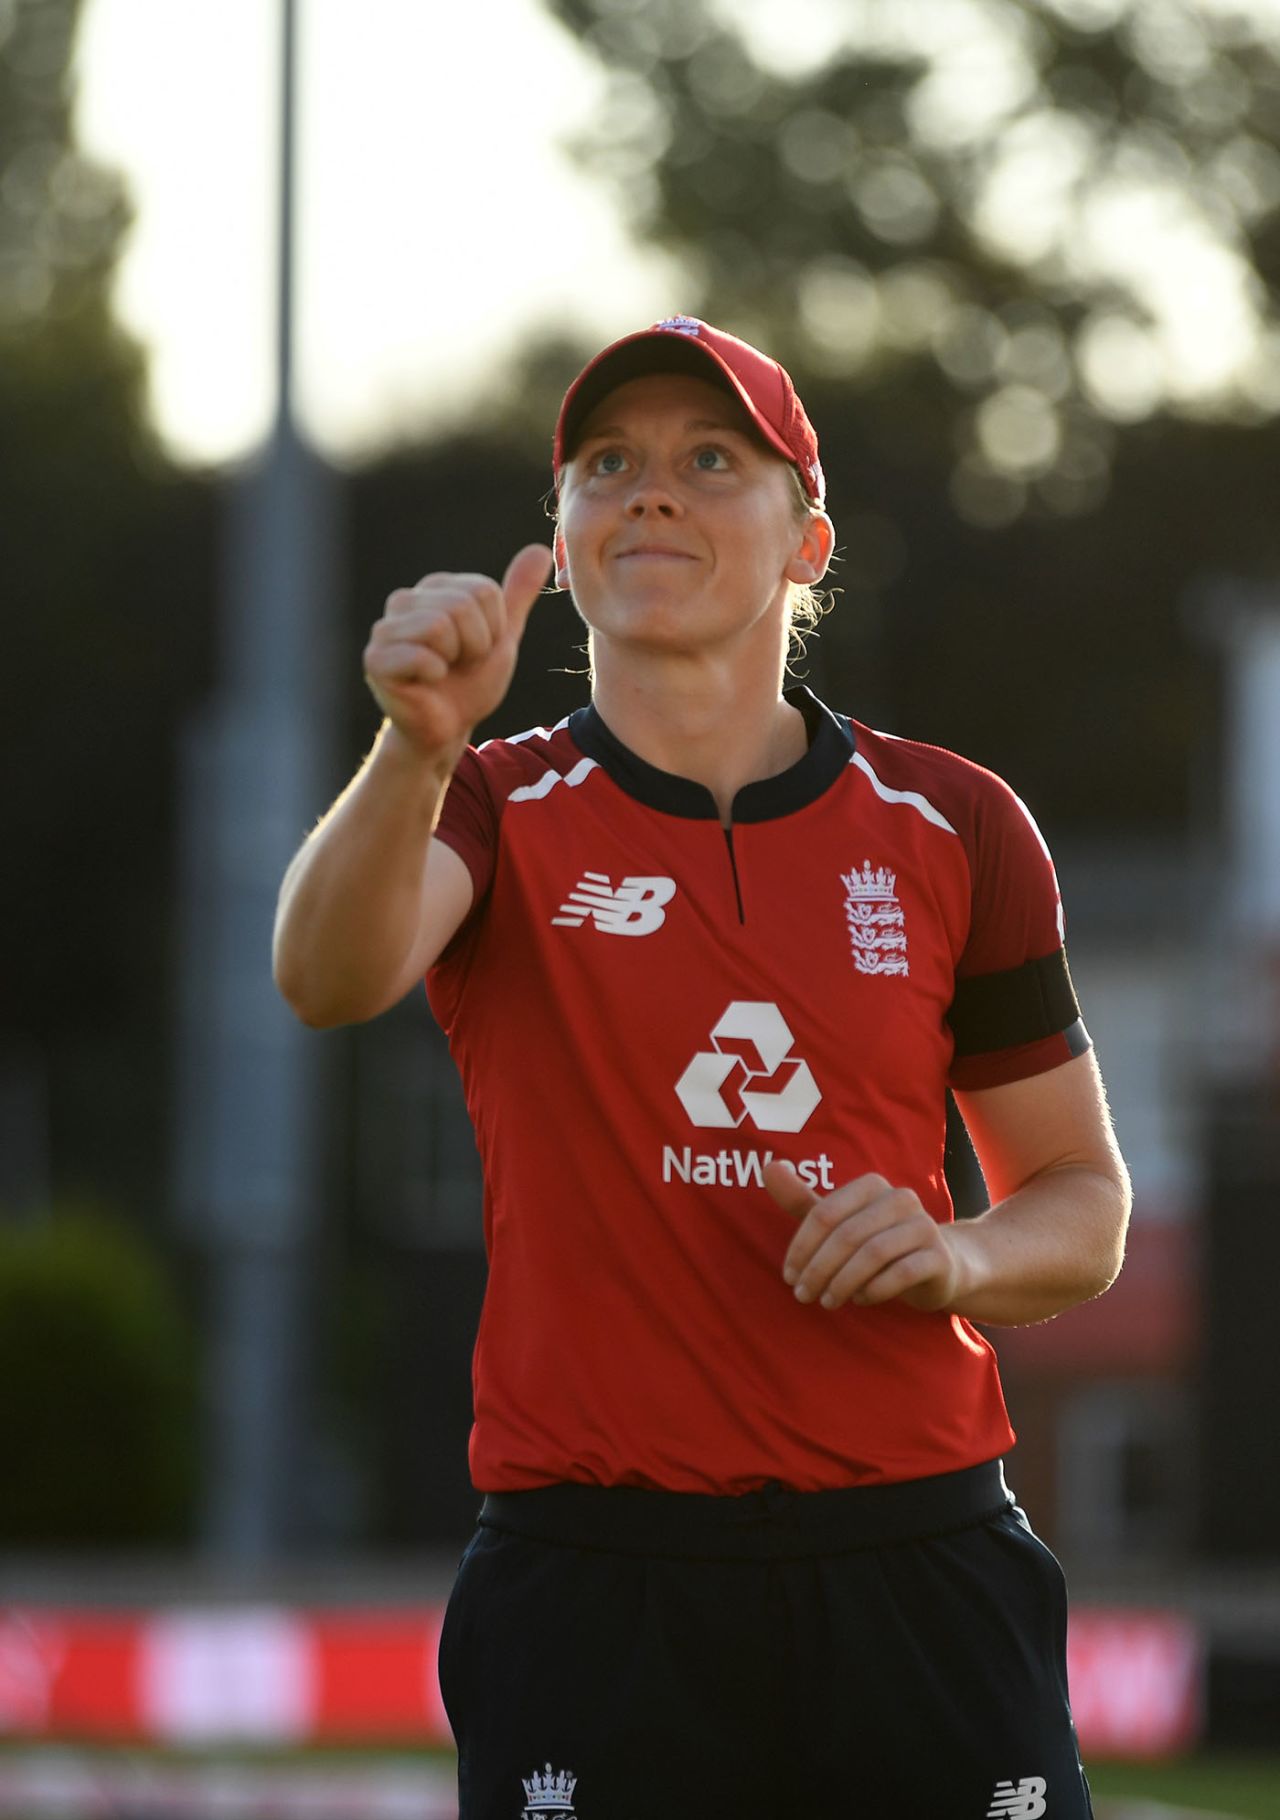 England captain Heather Knight at the toss, England women v West Indies women, 1st T20I, Derby, September 21, 2020